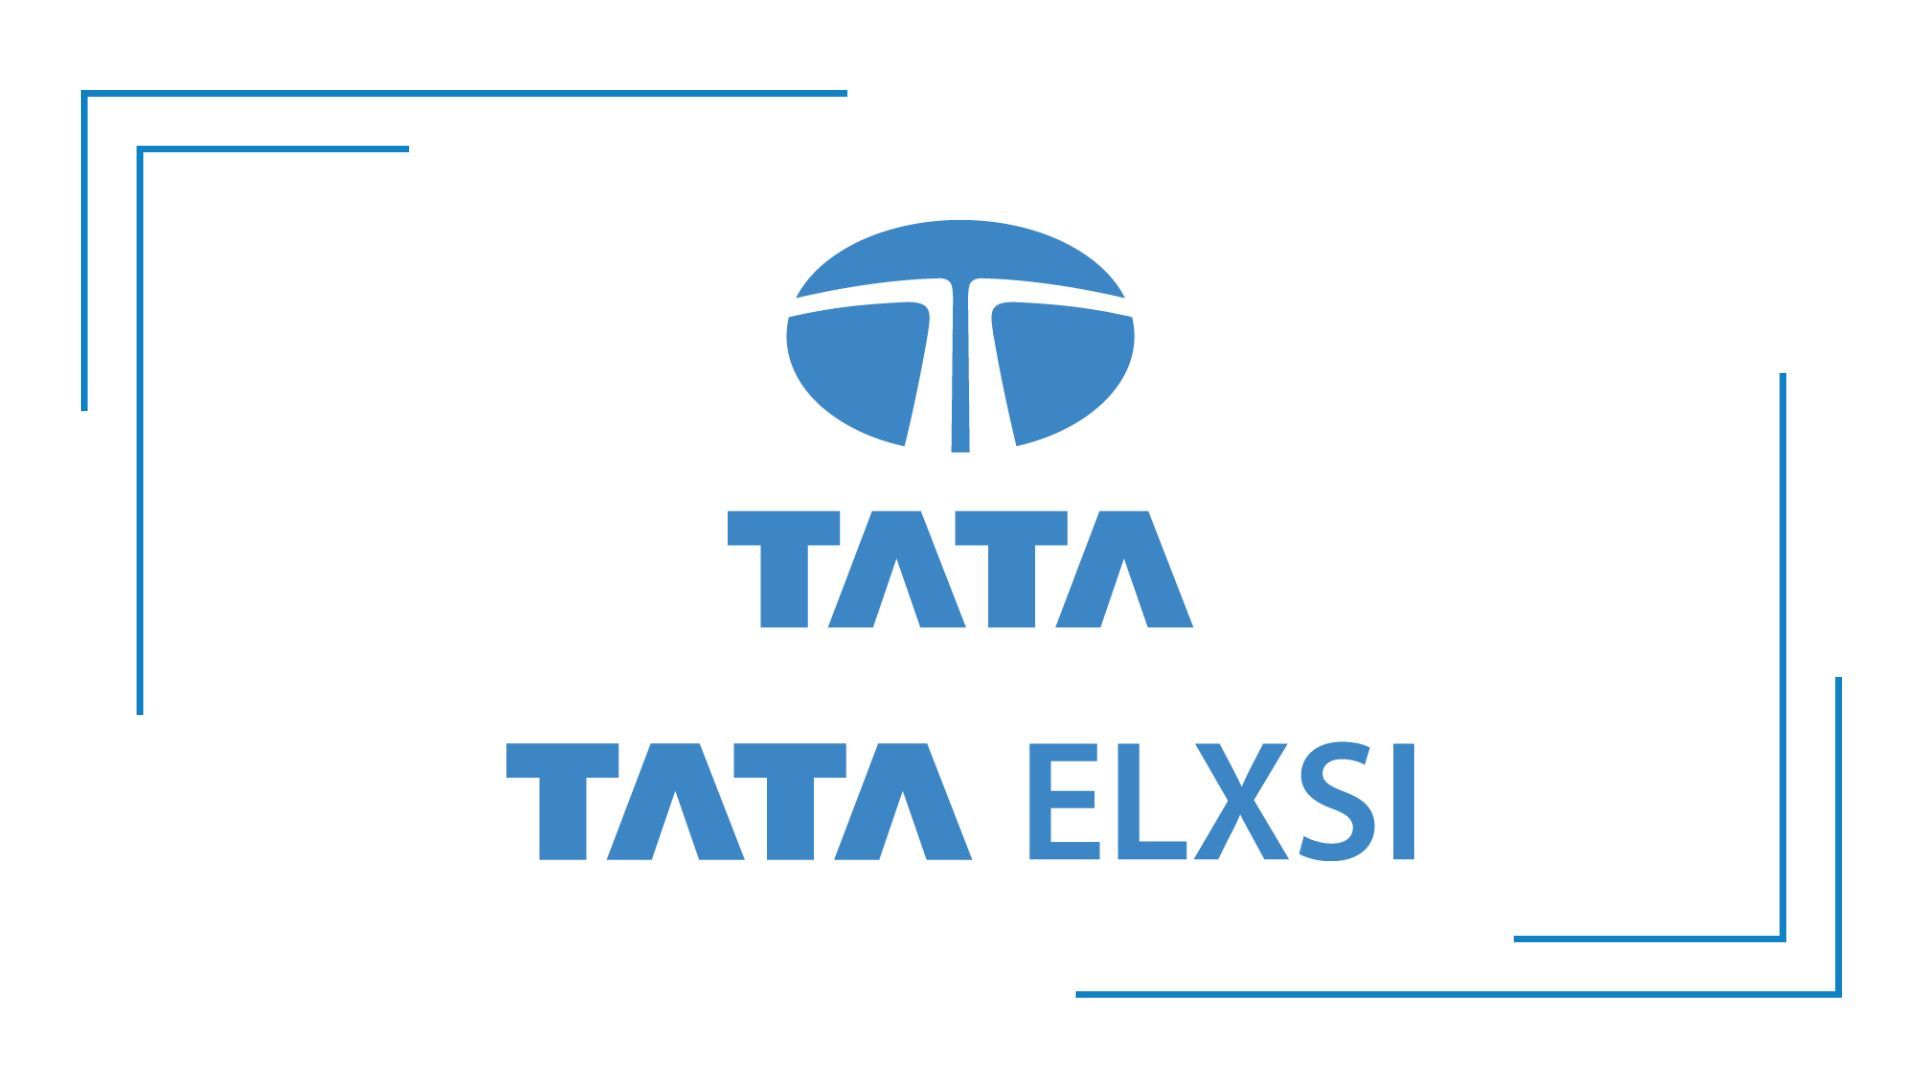 Tata Elxsi - List of Companies Owned by Tata Group